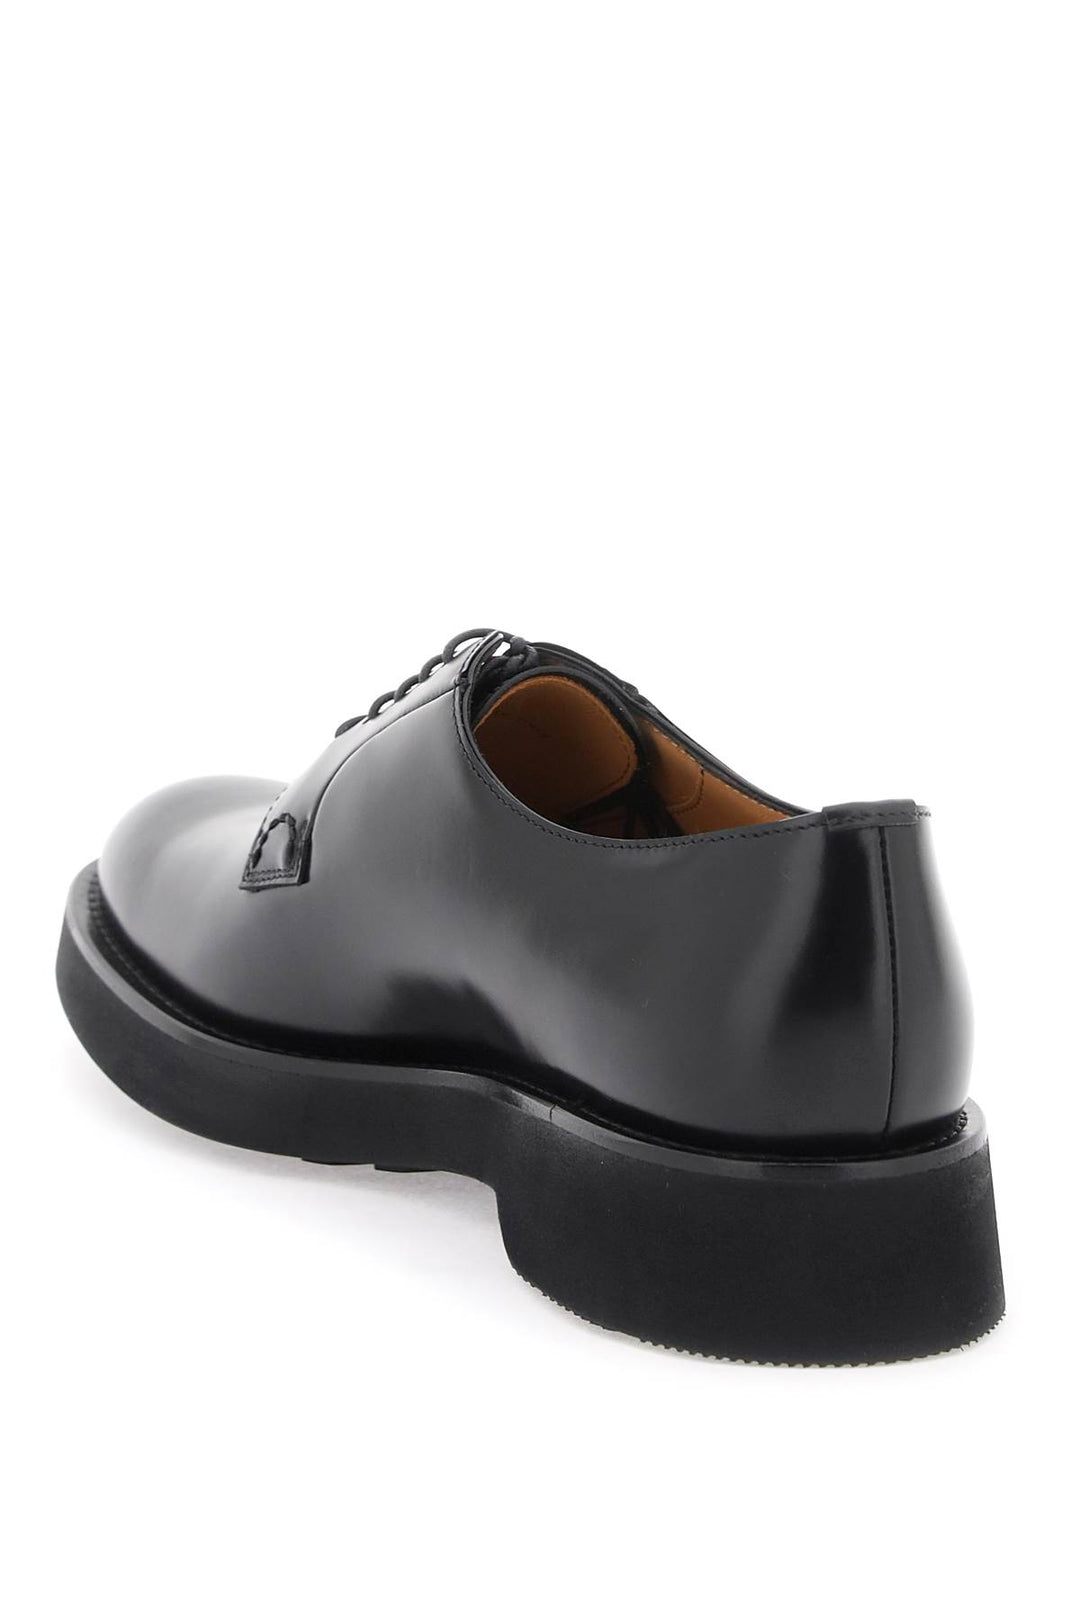 Church's Leather Shannon Derby Shoes   Black